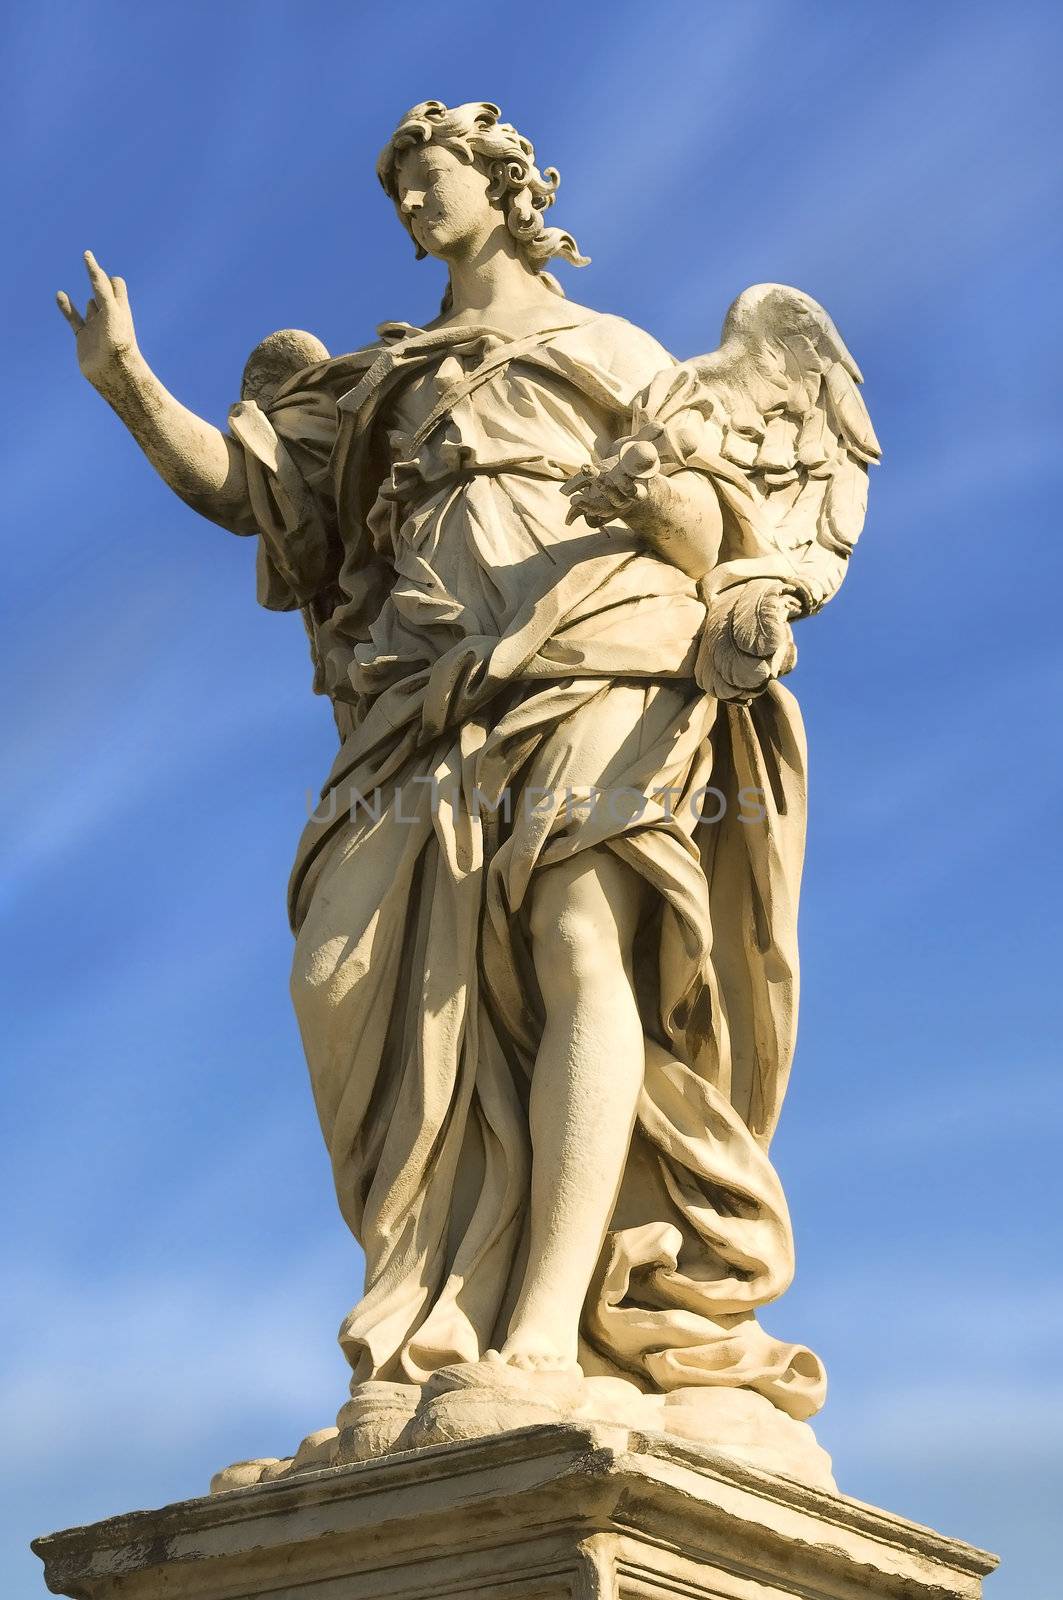 a statue of an angel standing on the bridge leading to the Castle Sant'Angelo, Rome